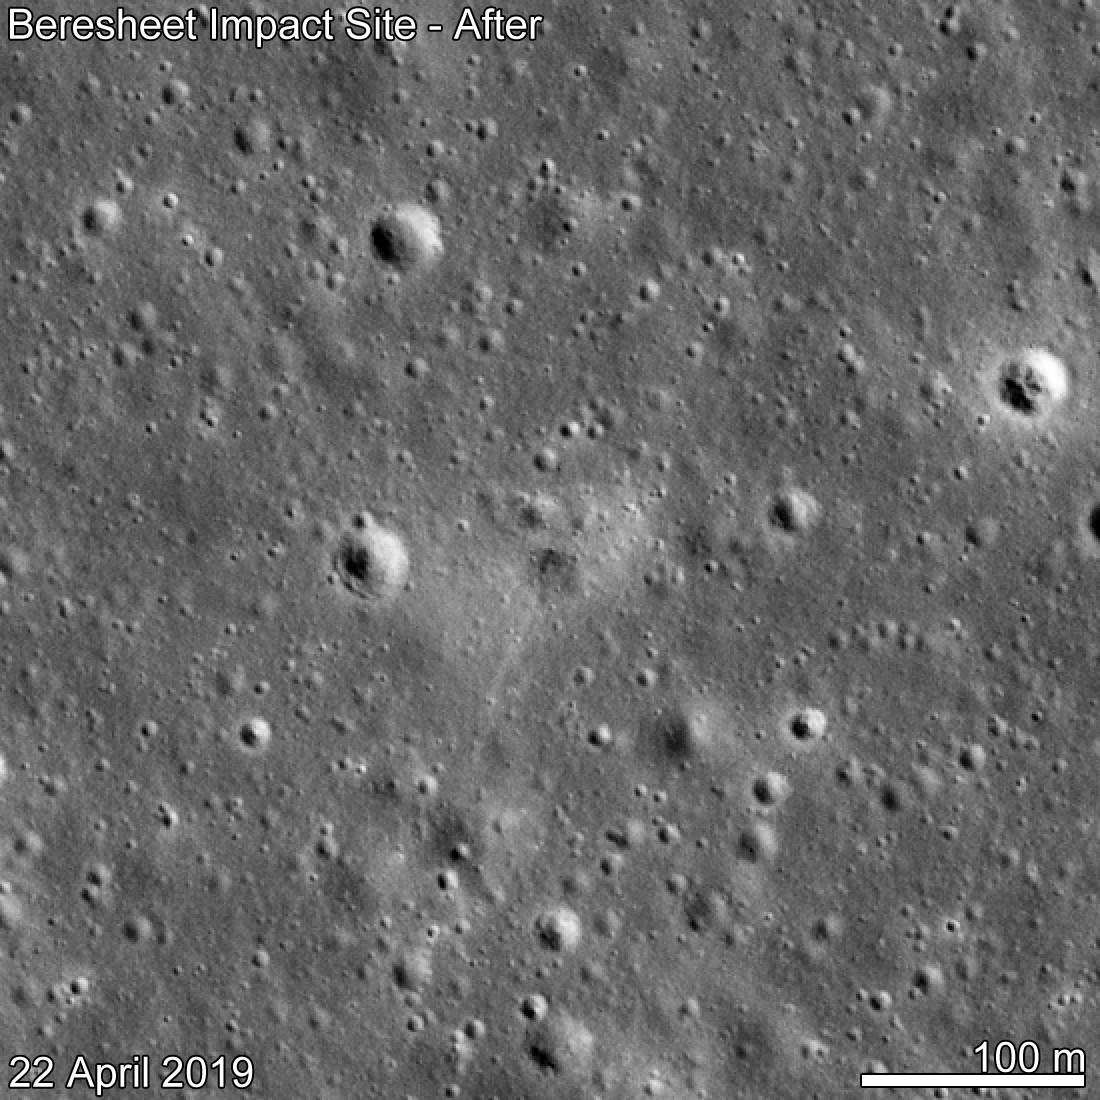 Animated GIF showing spacecraft impact crater appearing on the surface of the Moon.